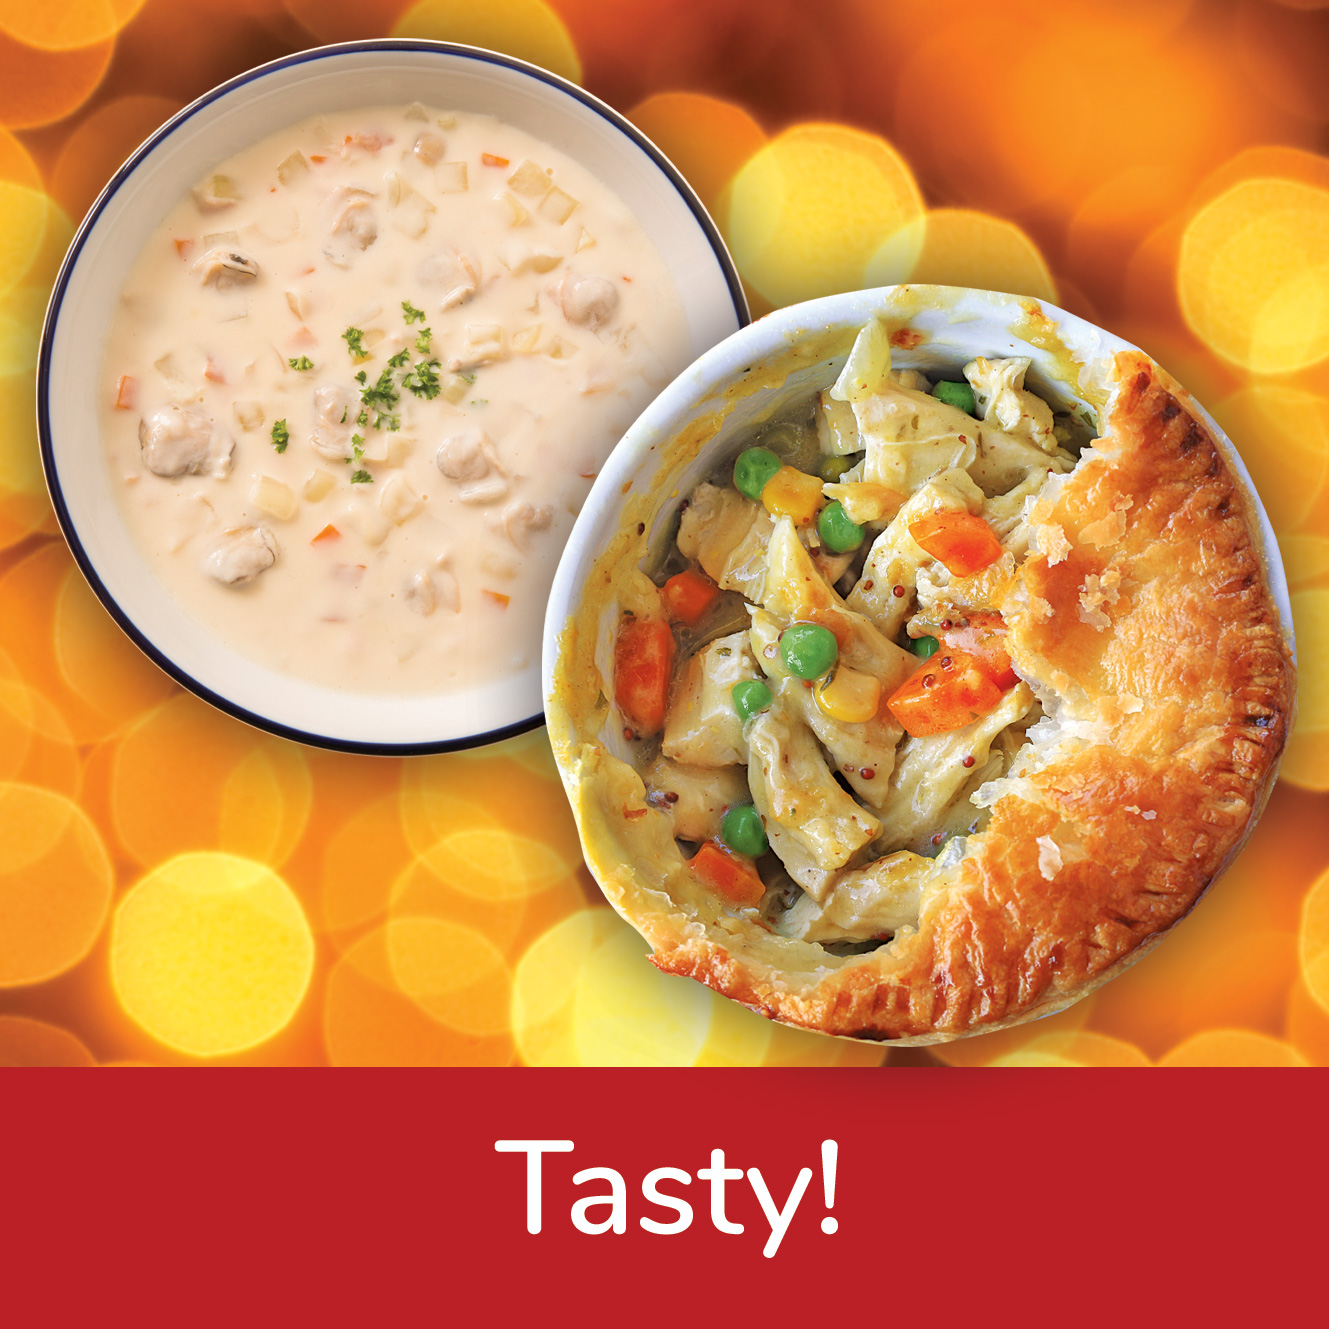 Bowl of New England Clam Chowder and a Chicken Pot Pie with a caption that reads, "tasty!"